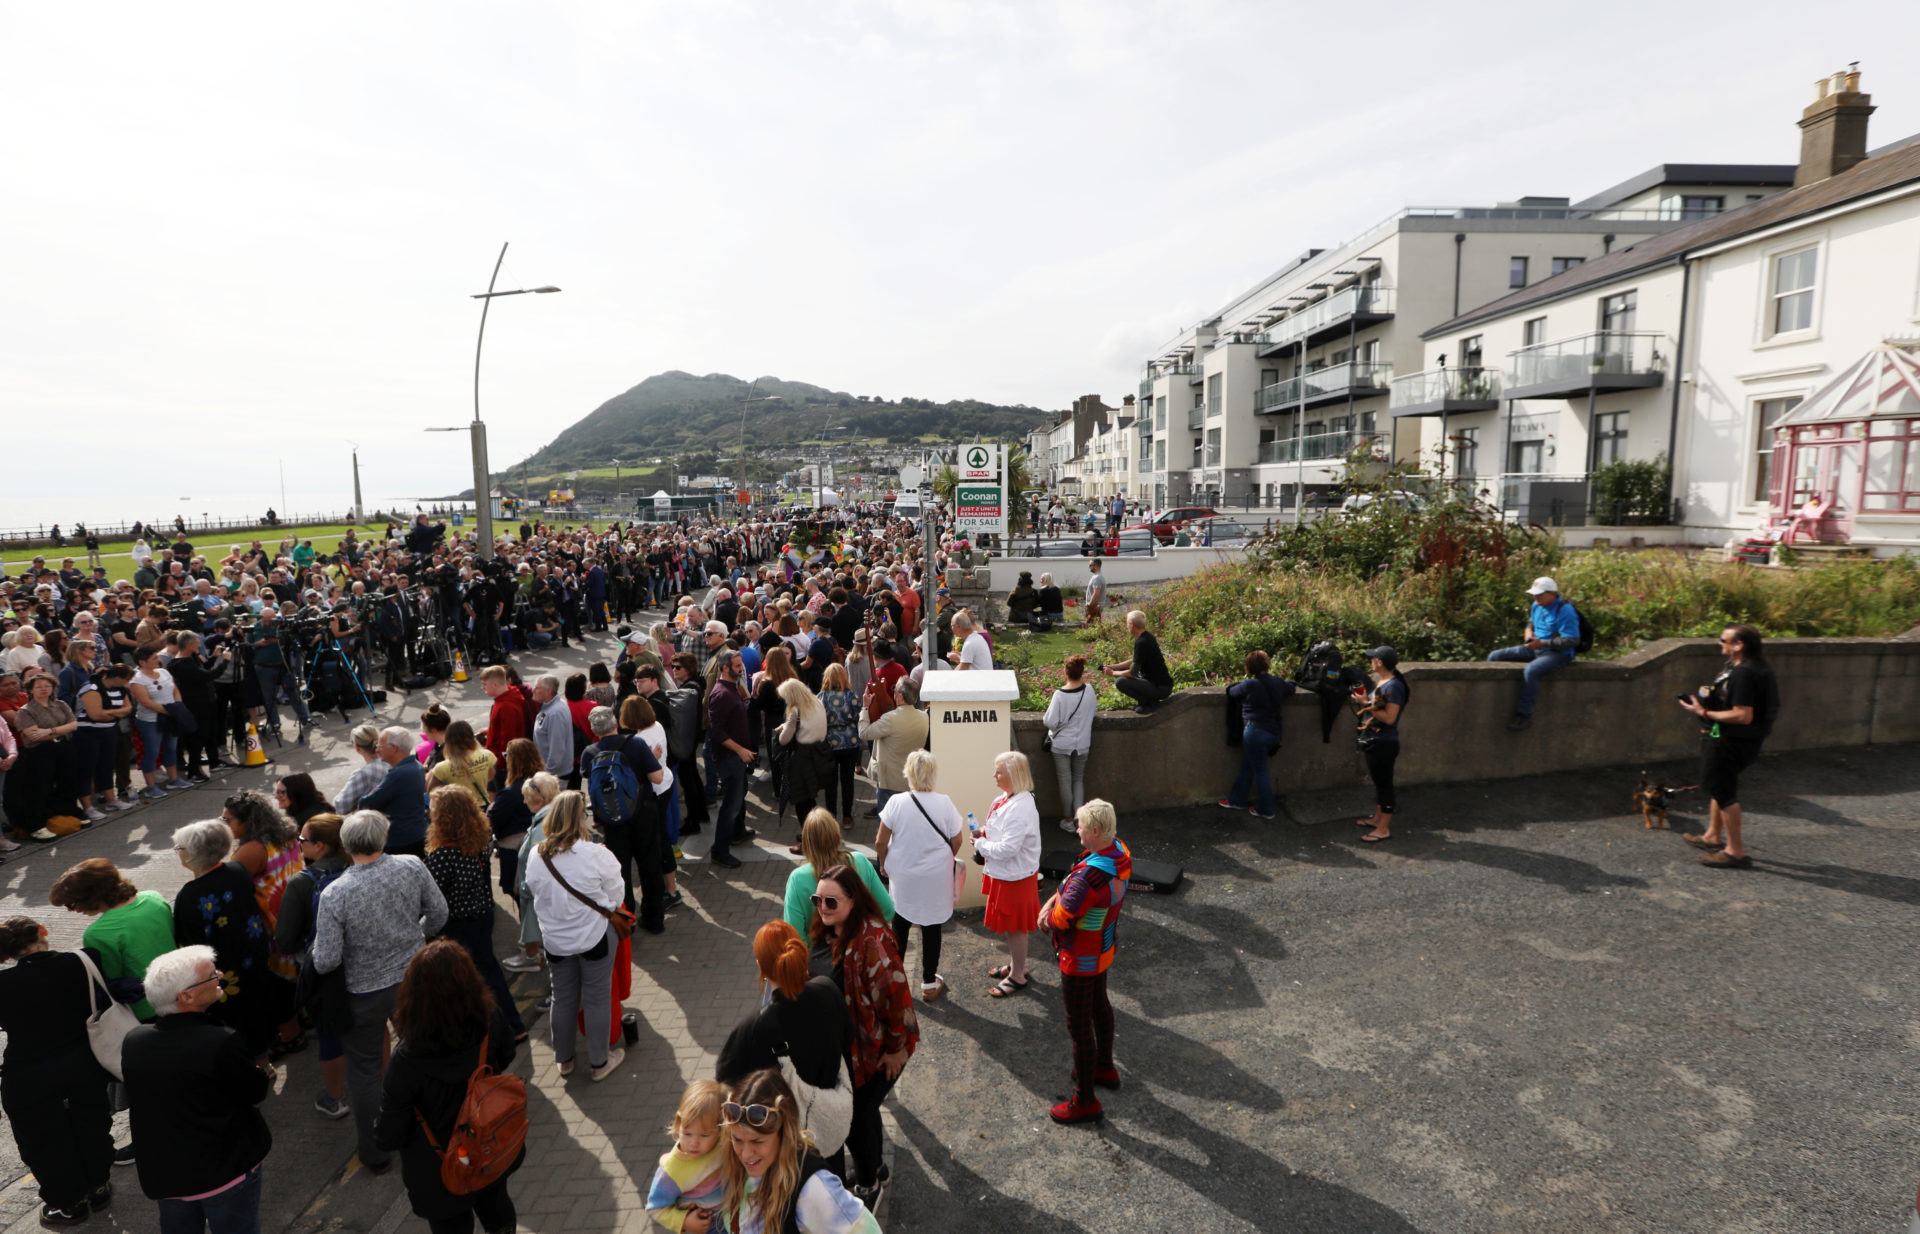 A huge crowd gathers outside Sinead O’Connor's former home in Bray on the morning of her funeral